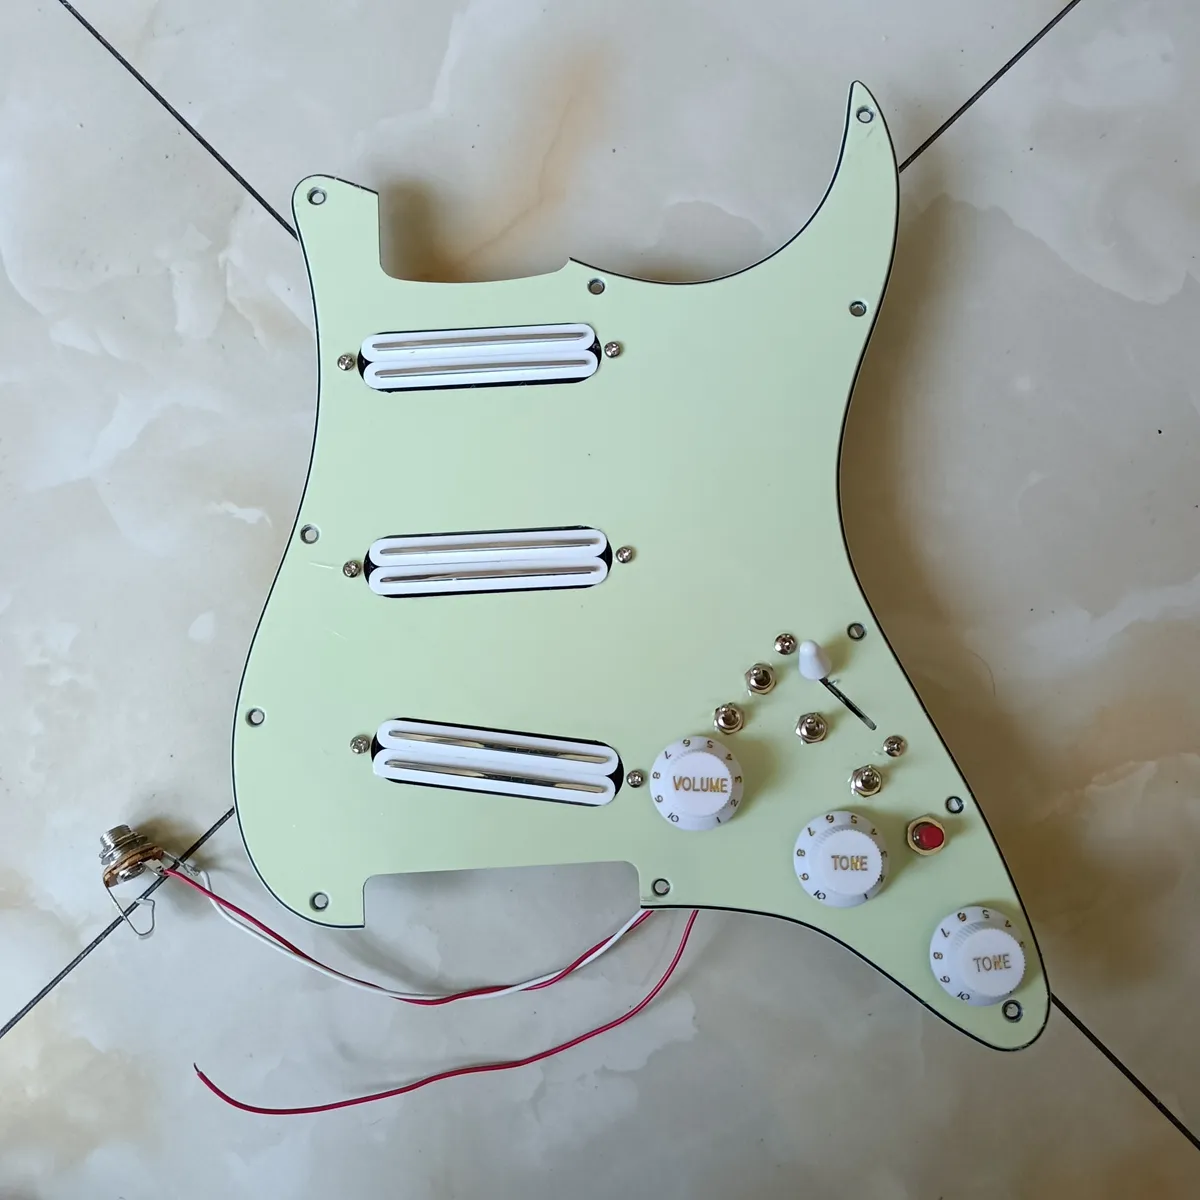 SSS Upgrade Loaded Pickguard Set Multifunction Switch White Mini Humbucker Pickups 7 Way Toggle Welding Harness For FD Guitar 20 style combinations